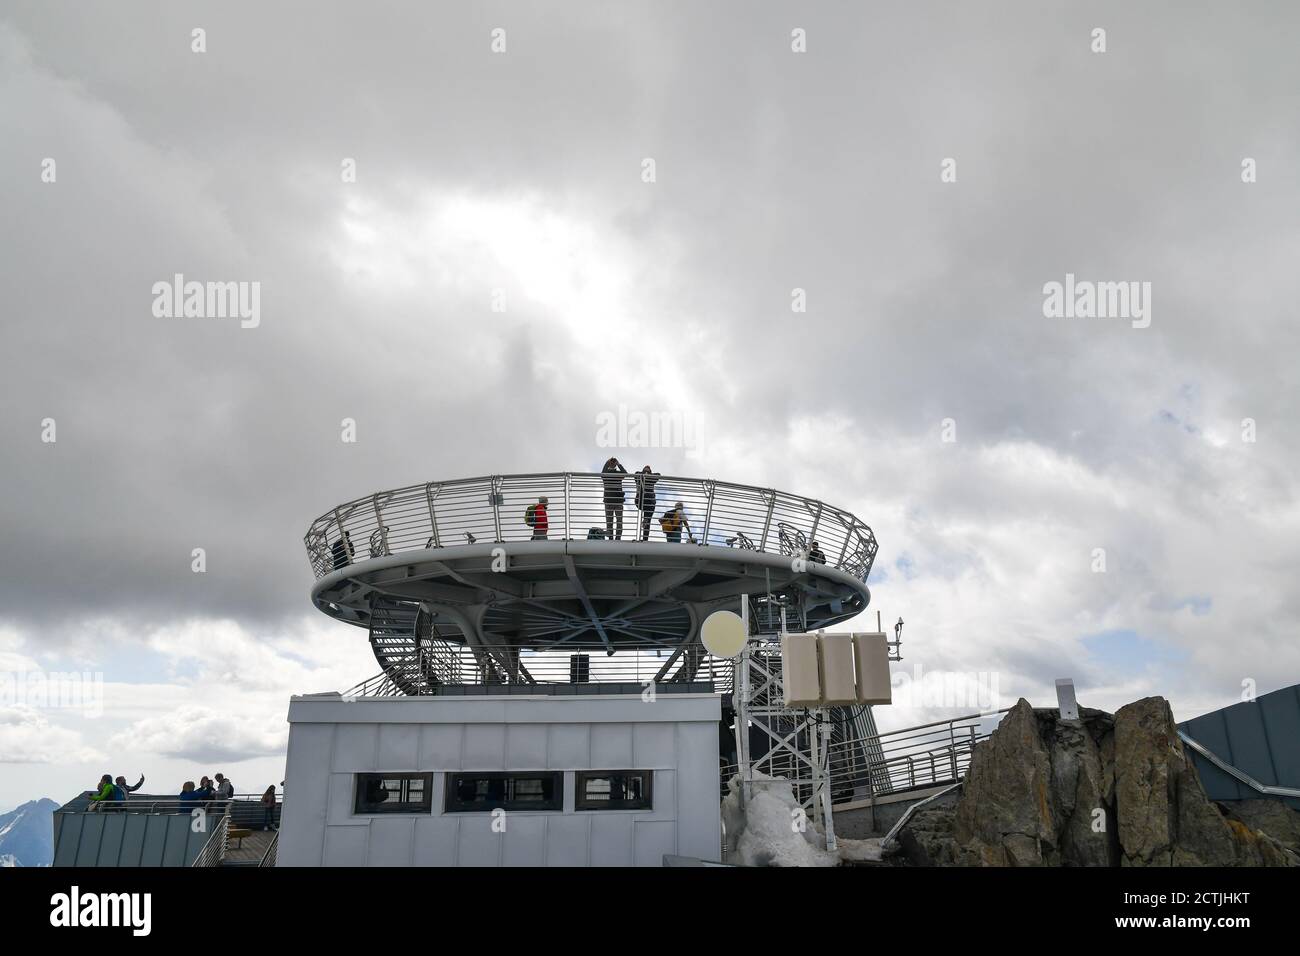 People on the panoramic terraces at Pointe Helbronner station of Skyway Monte Bianco cableway against cloudy sky, Courmayeur, Aosta, Italy Stock Photo